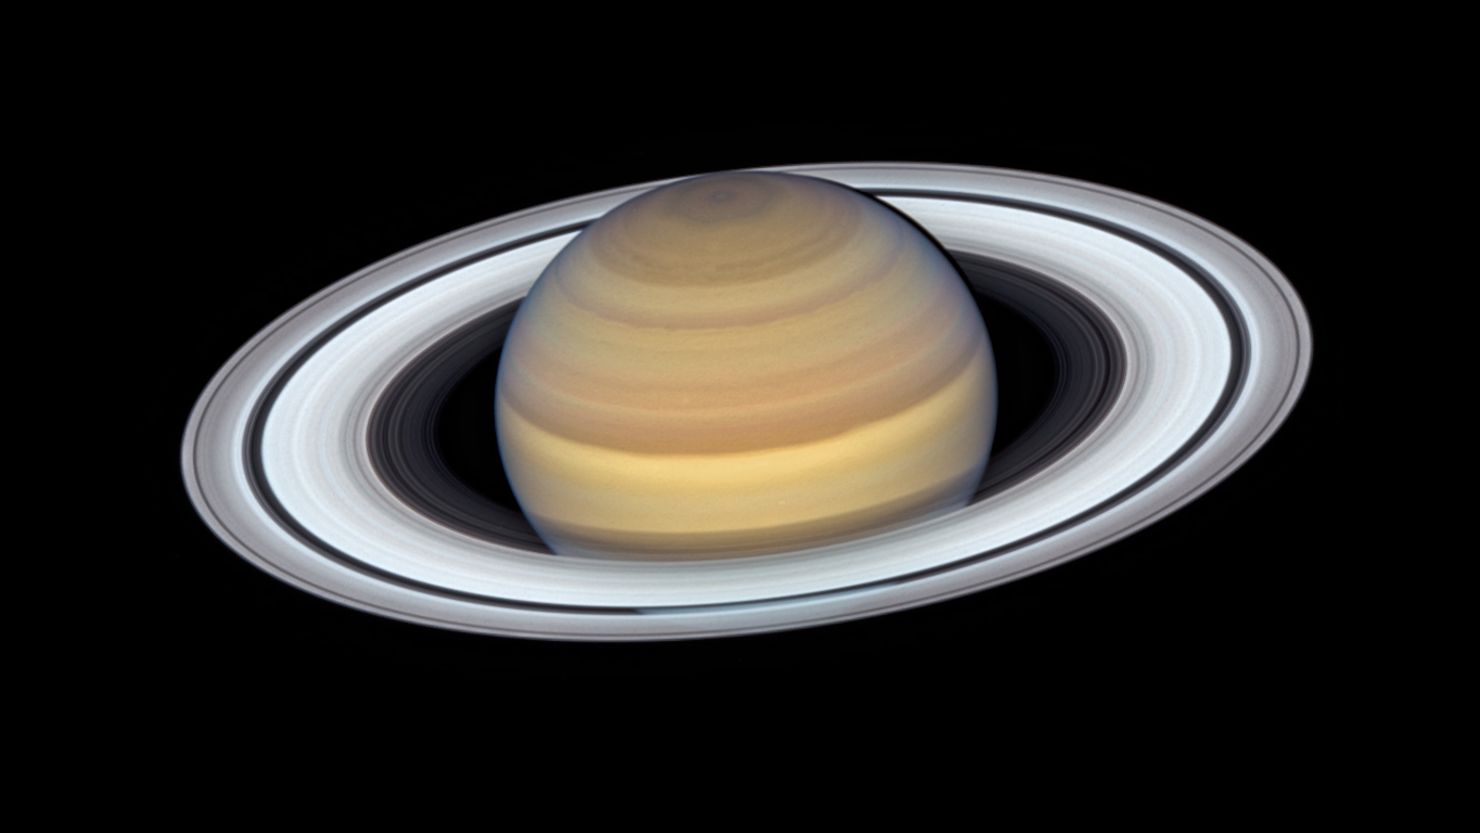 The latest view of Saturn from NASA's Hubble Space Telescope captures exquisite details of the ring system.